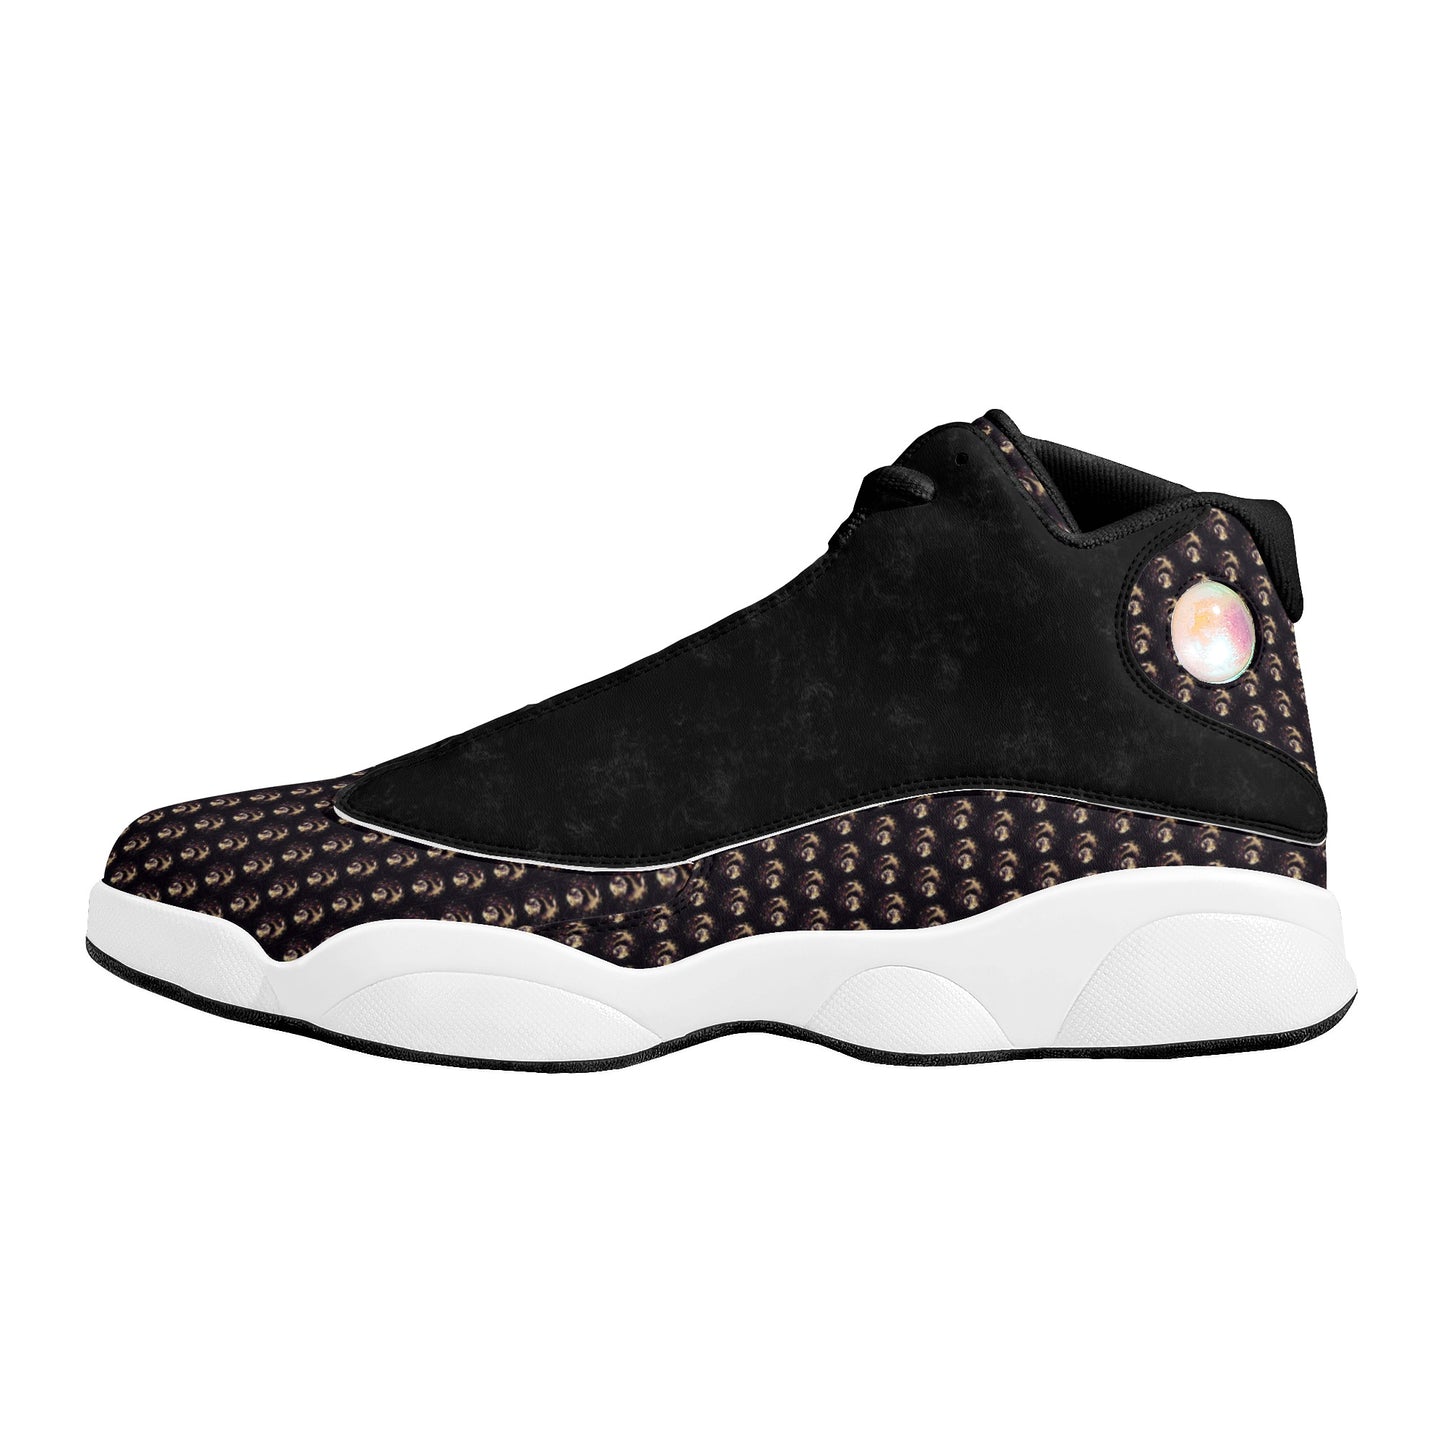 CV20YL - ONLY THE STRONG Mens White Soles Basketball Shoes